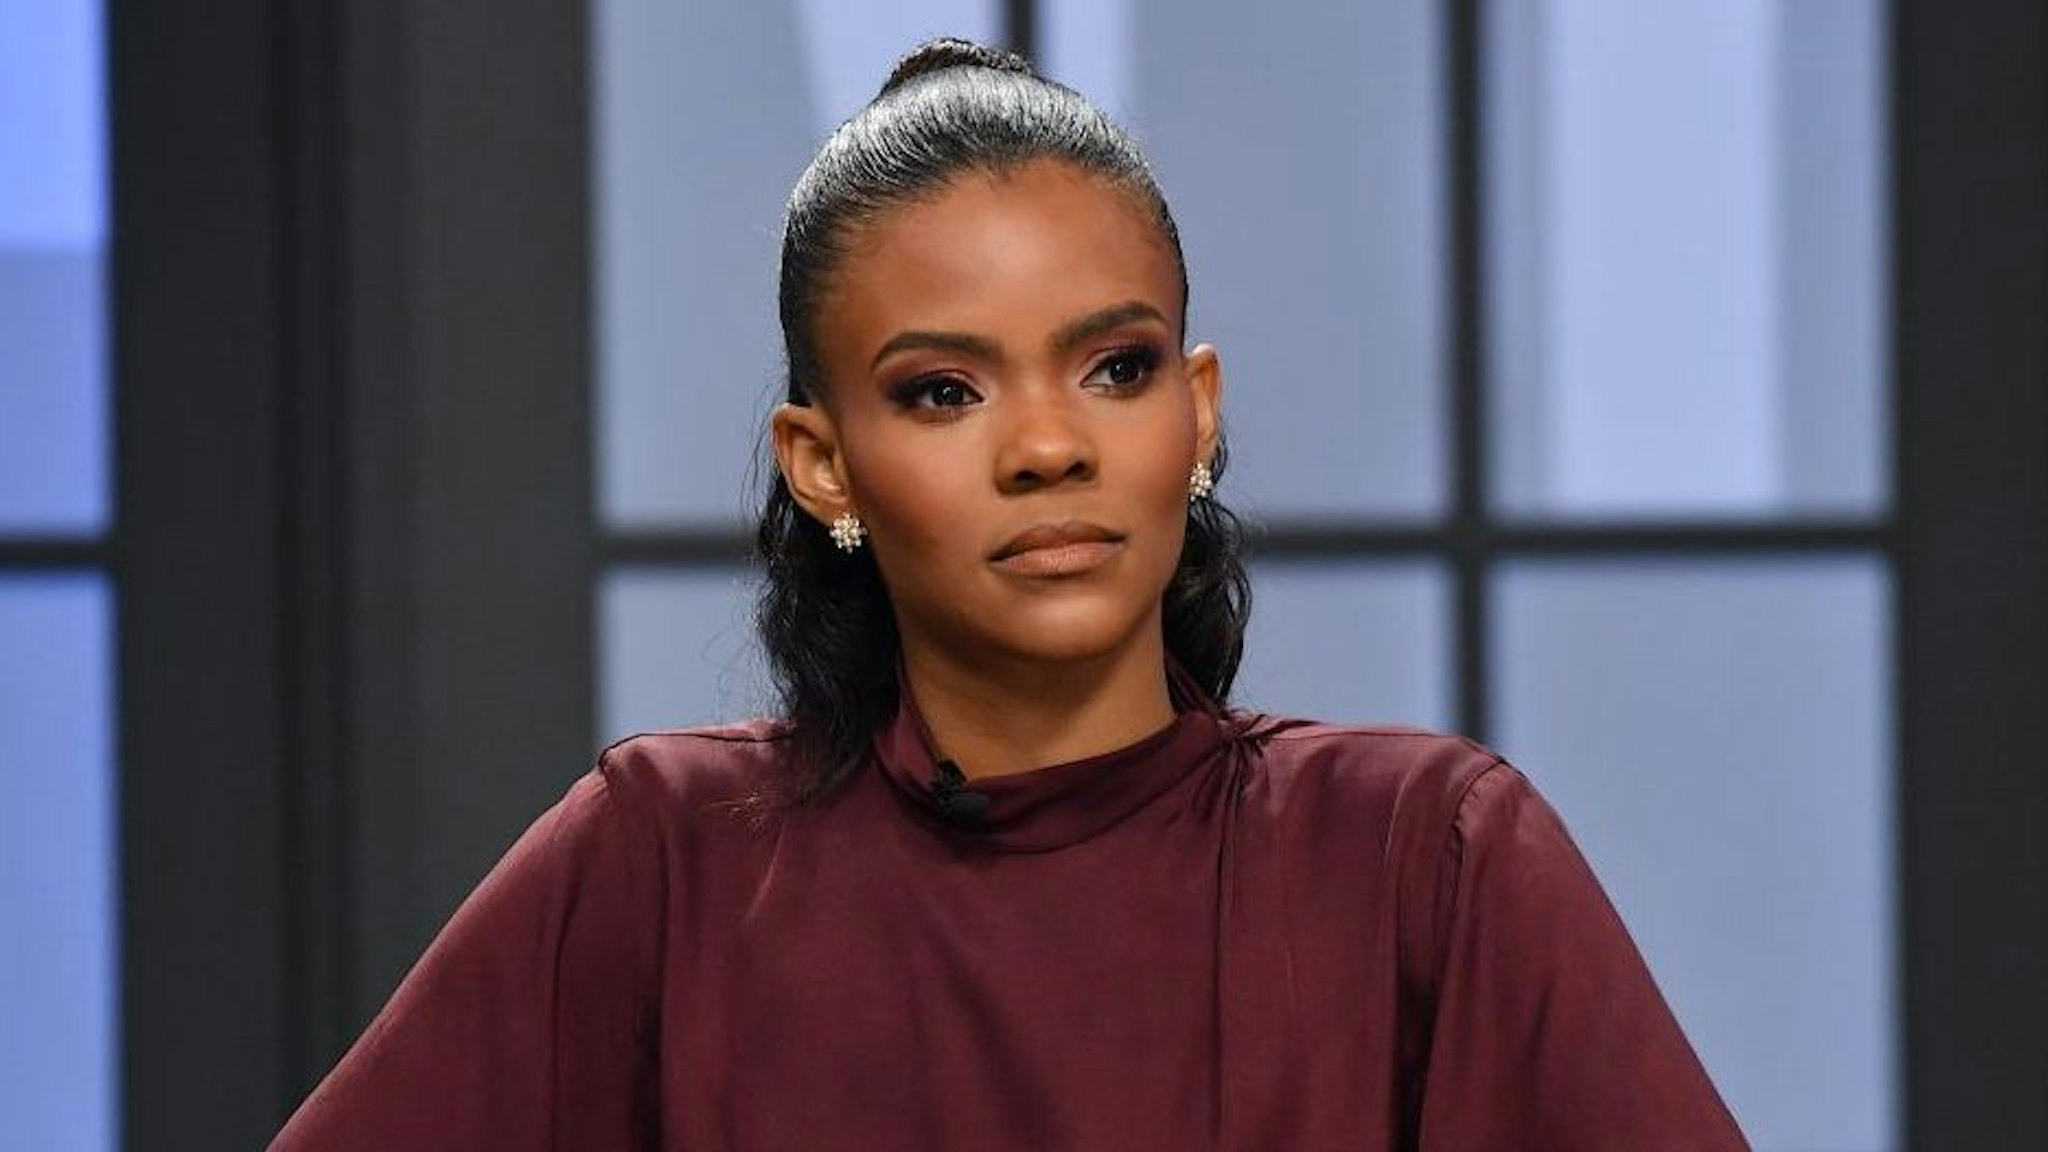 Candace Owens is seen on set of "Candace" on November 01, 2021 in Nashville, Tennessee.